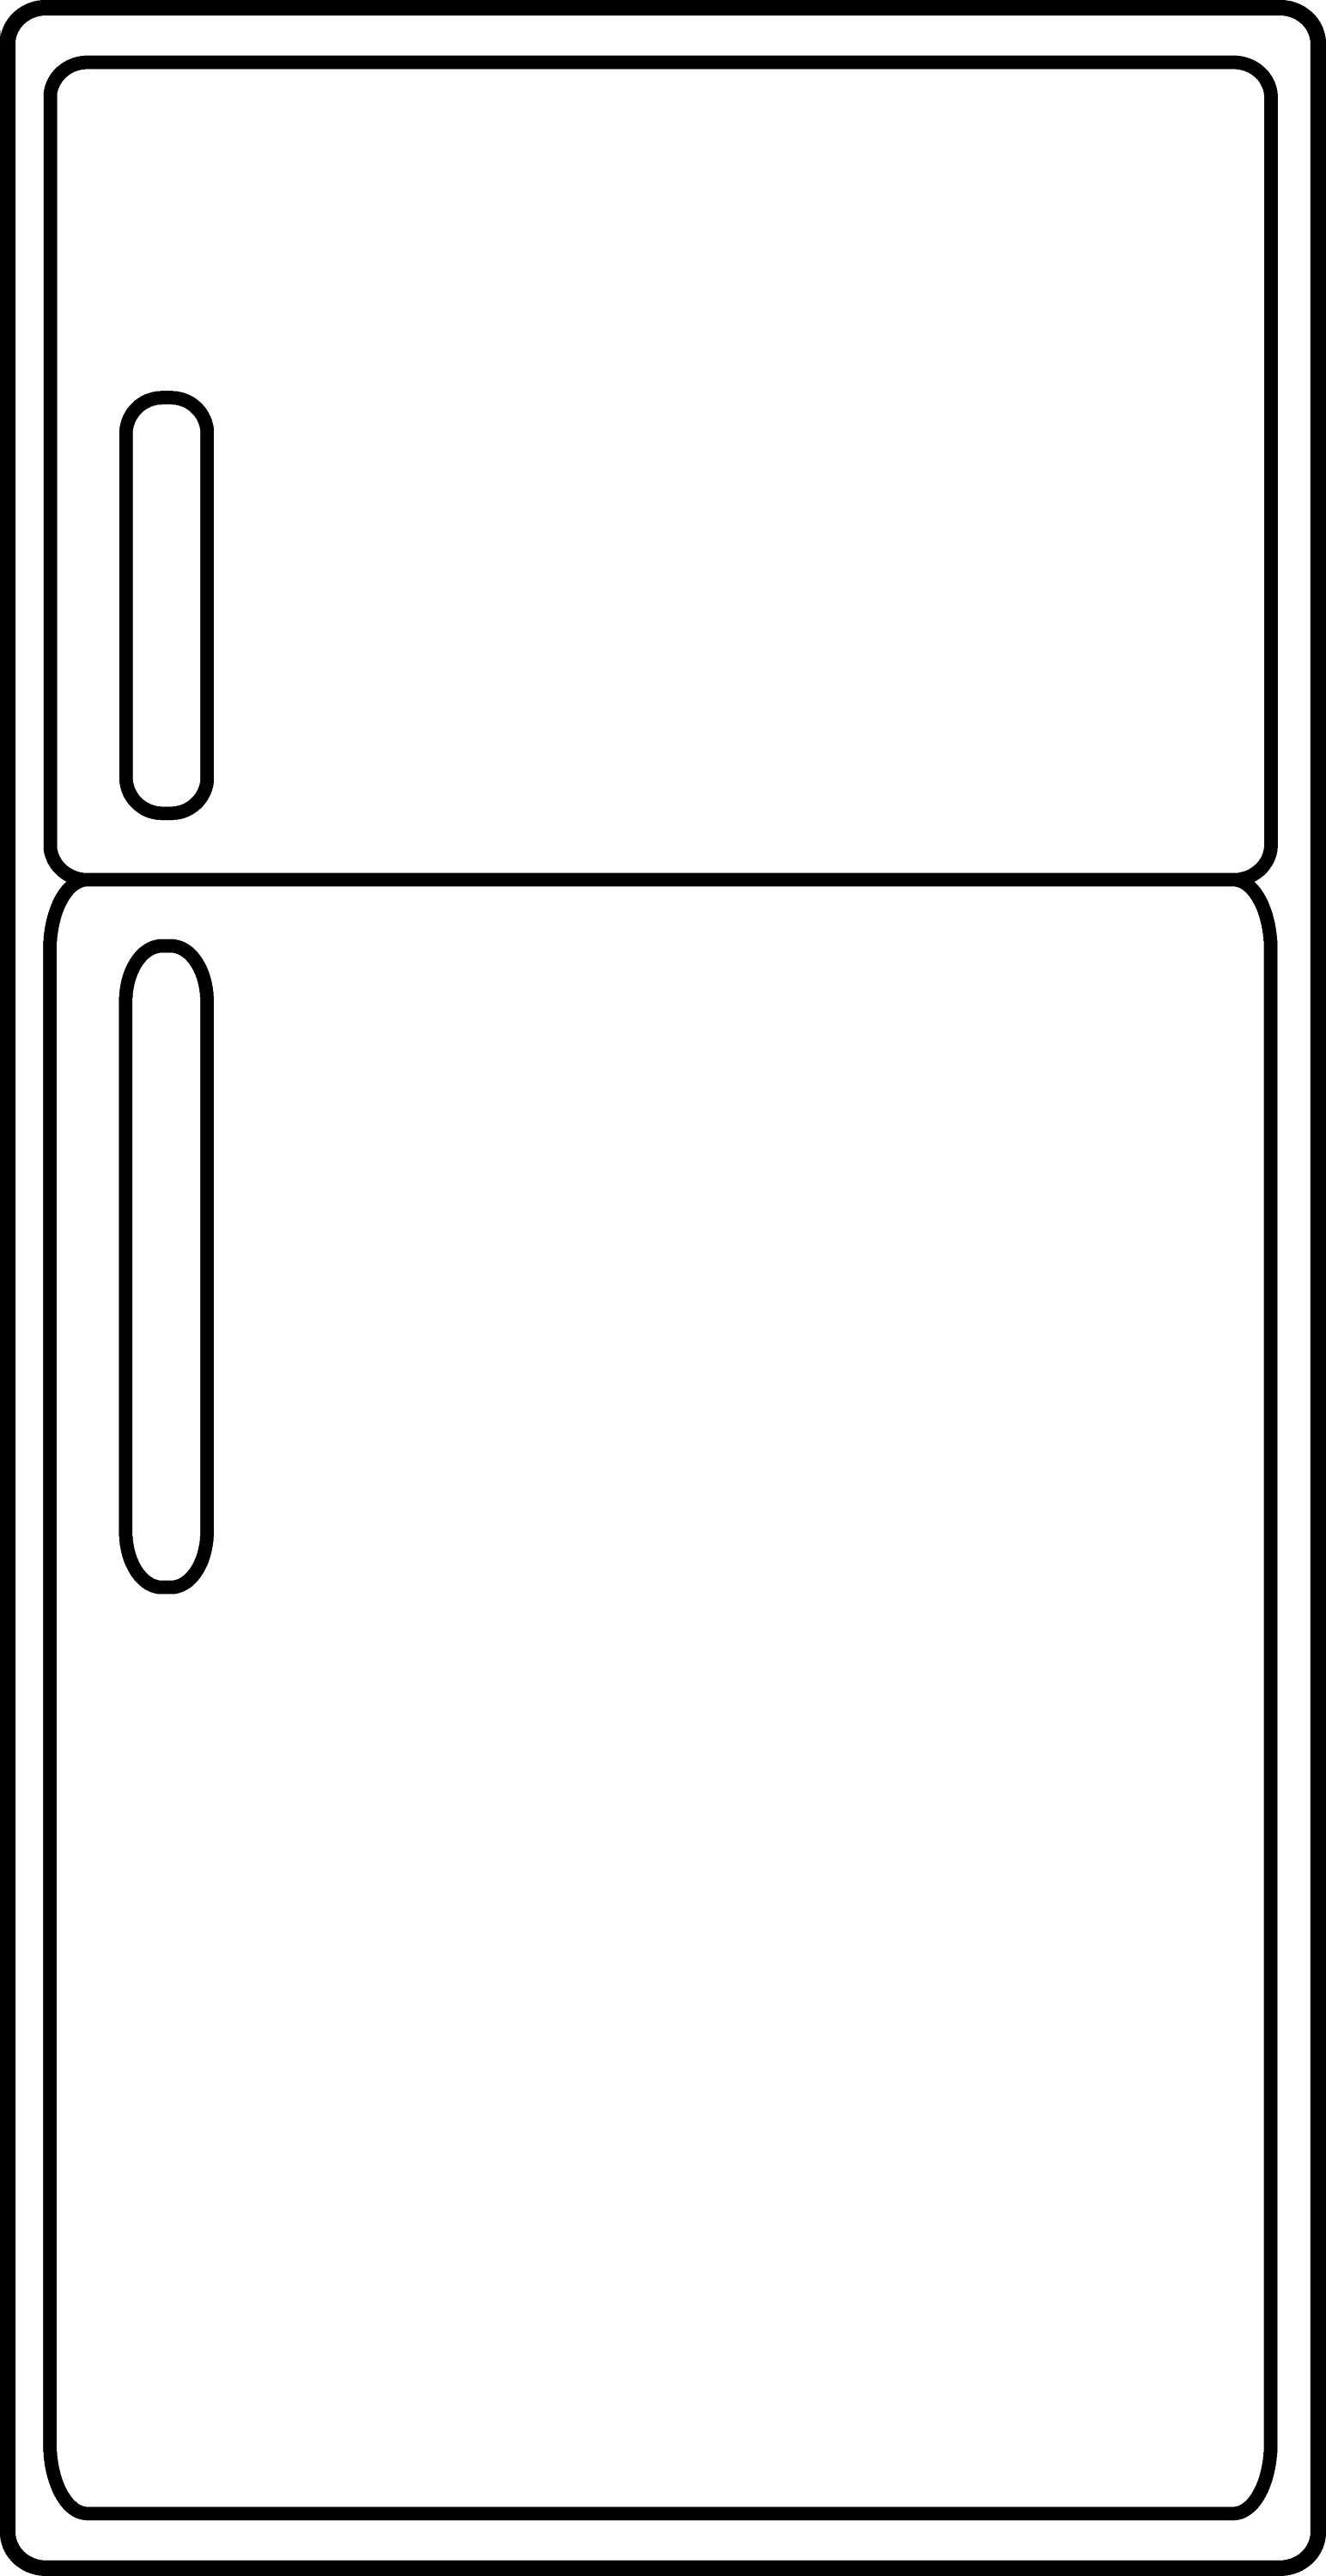 refrigerator clipart black and white - photo #3